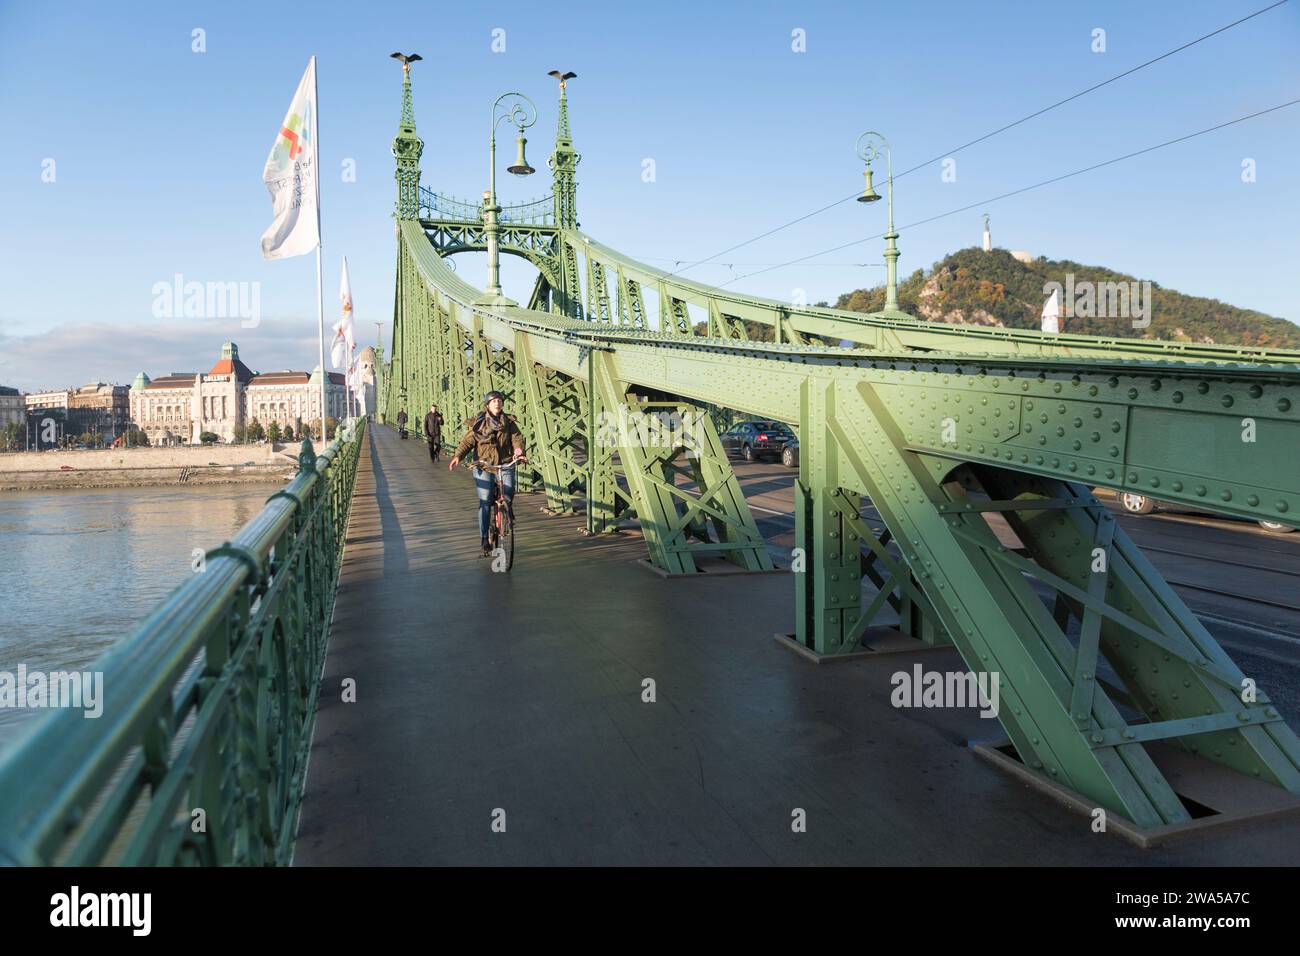 Hungary, Budapest, cyclist on the Liberty Bridge over the river Danube. Stock Photo